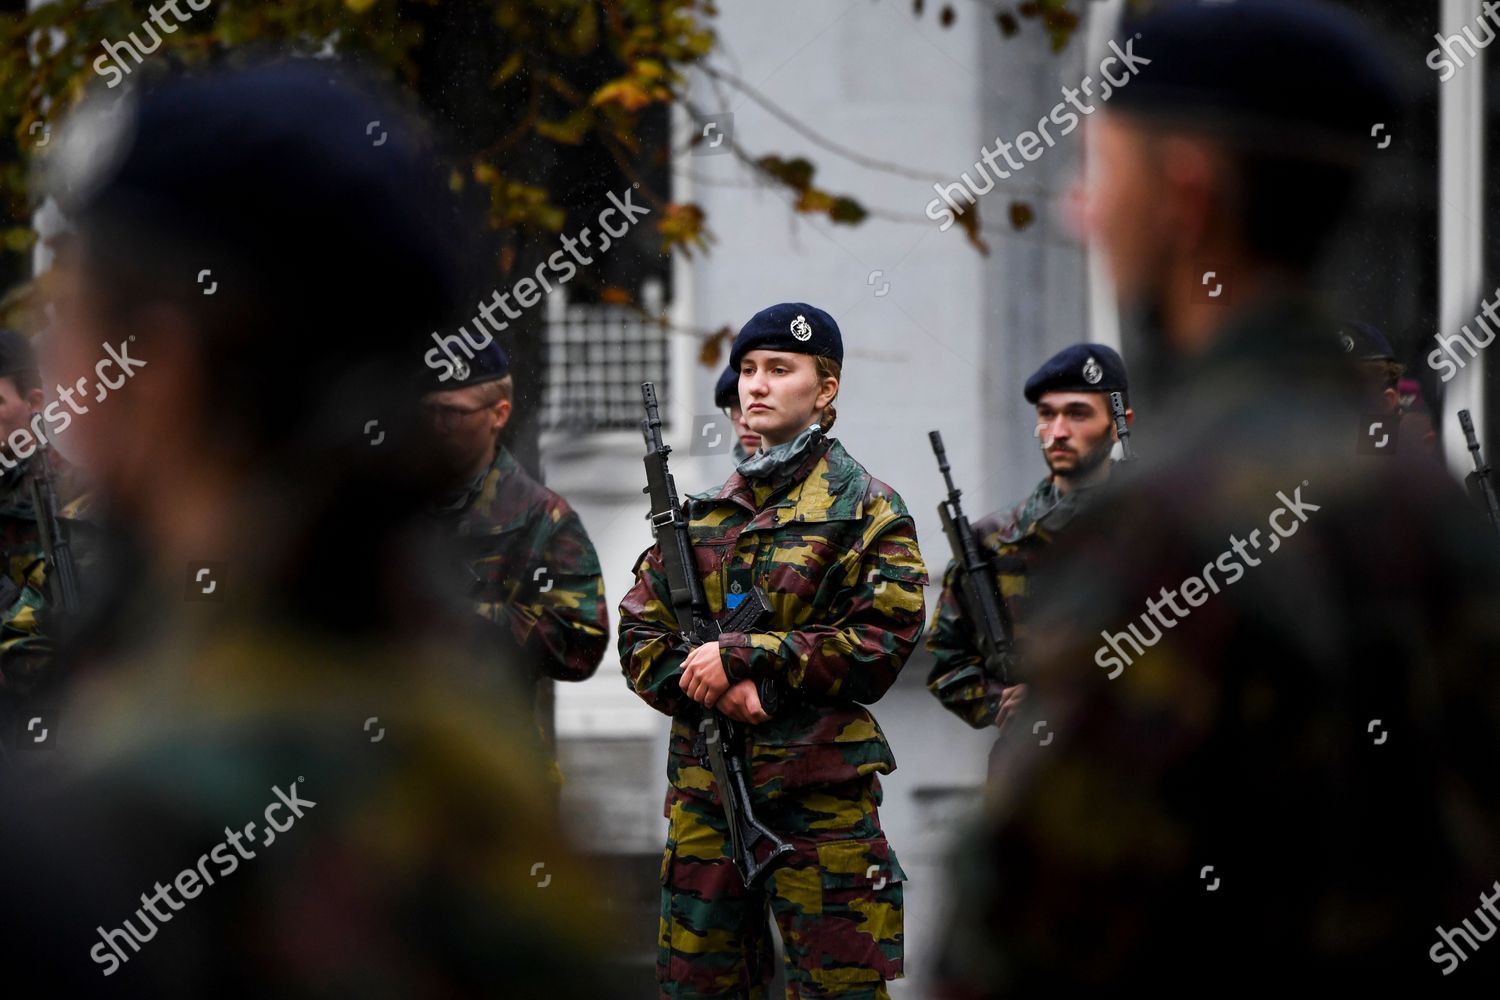 belgian-royals-attend-ceremony-for-the-presentation-of-the-blue-berets-royal-military-academy-erm-brussels-belgium-shutterstock-editorial-10790437h.jpg